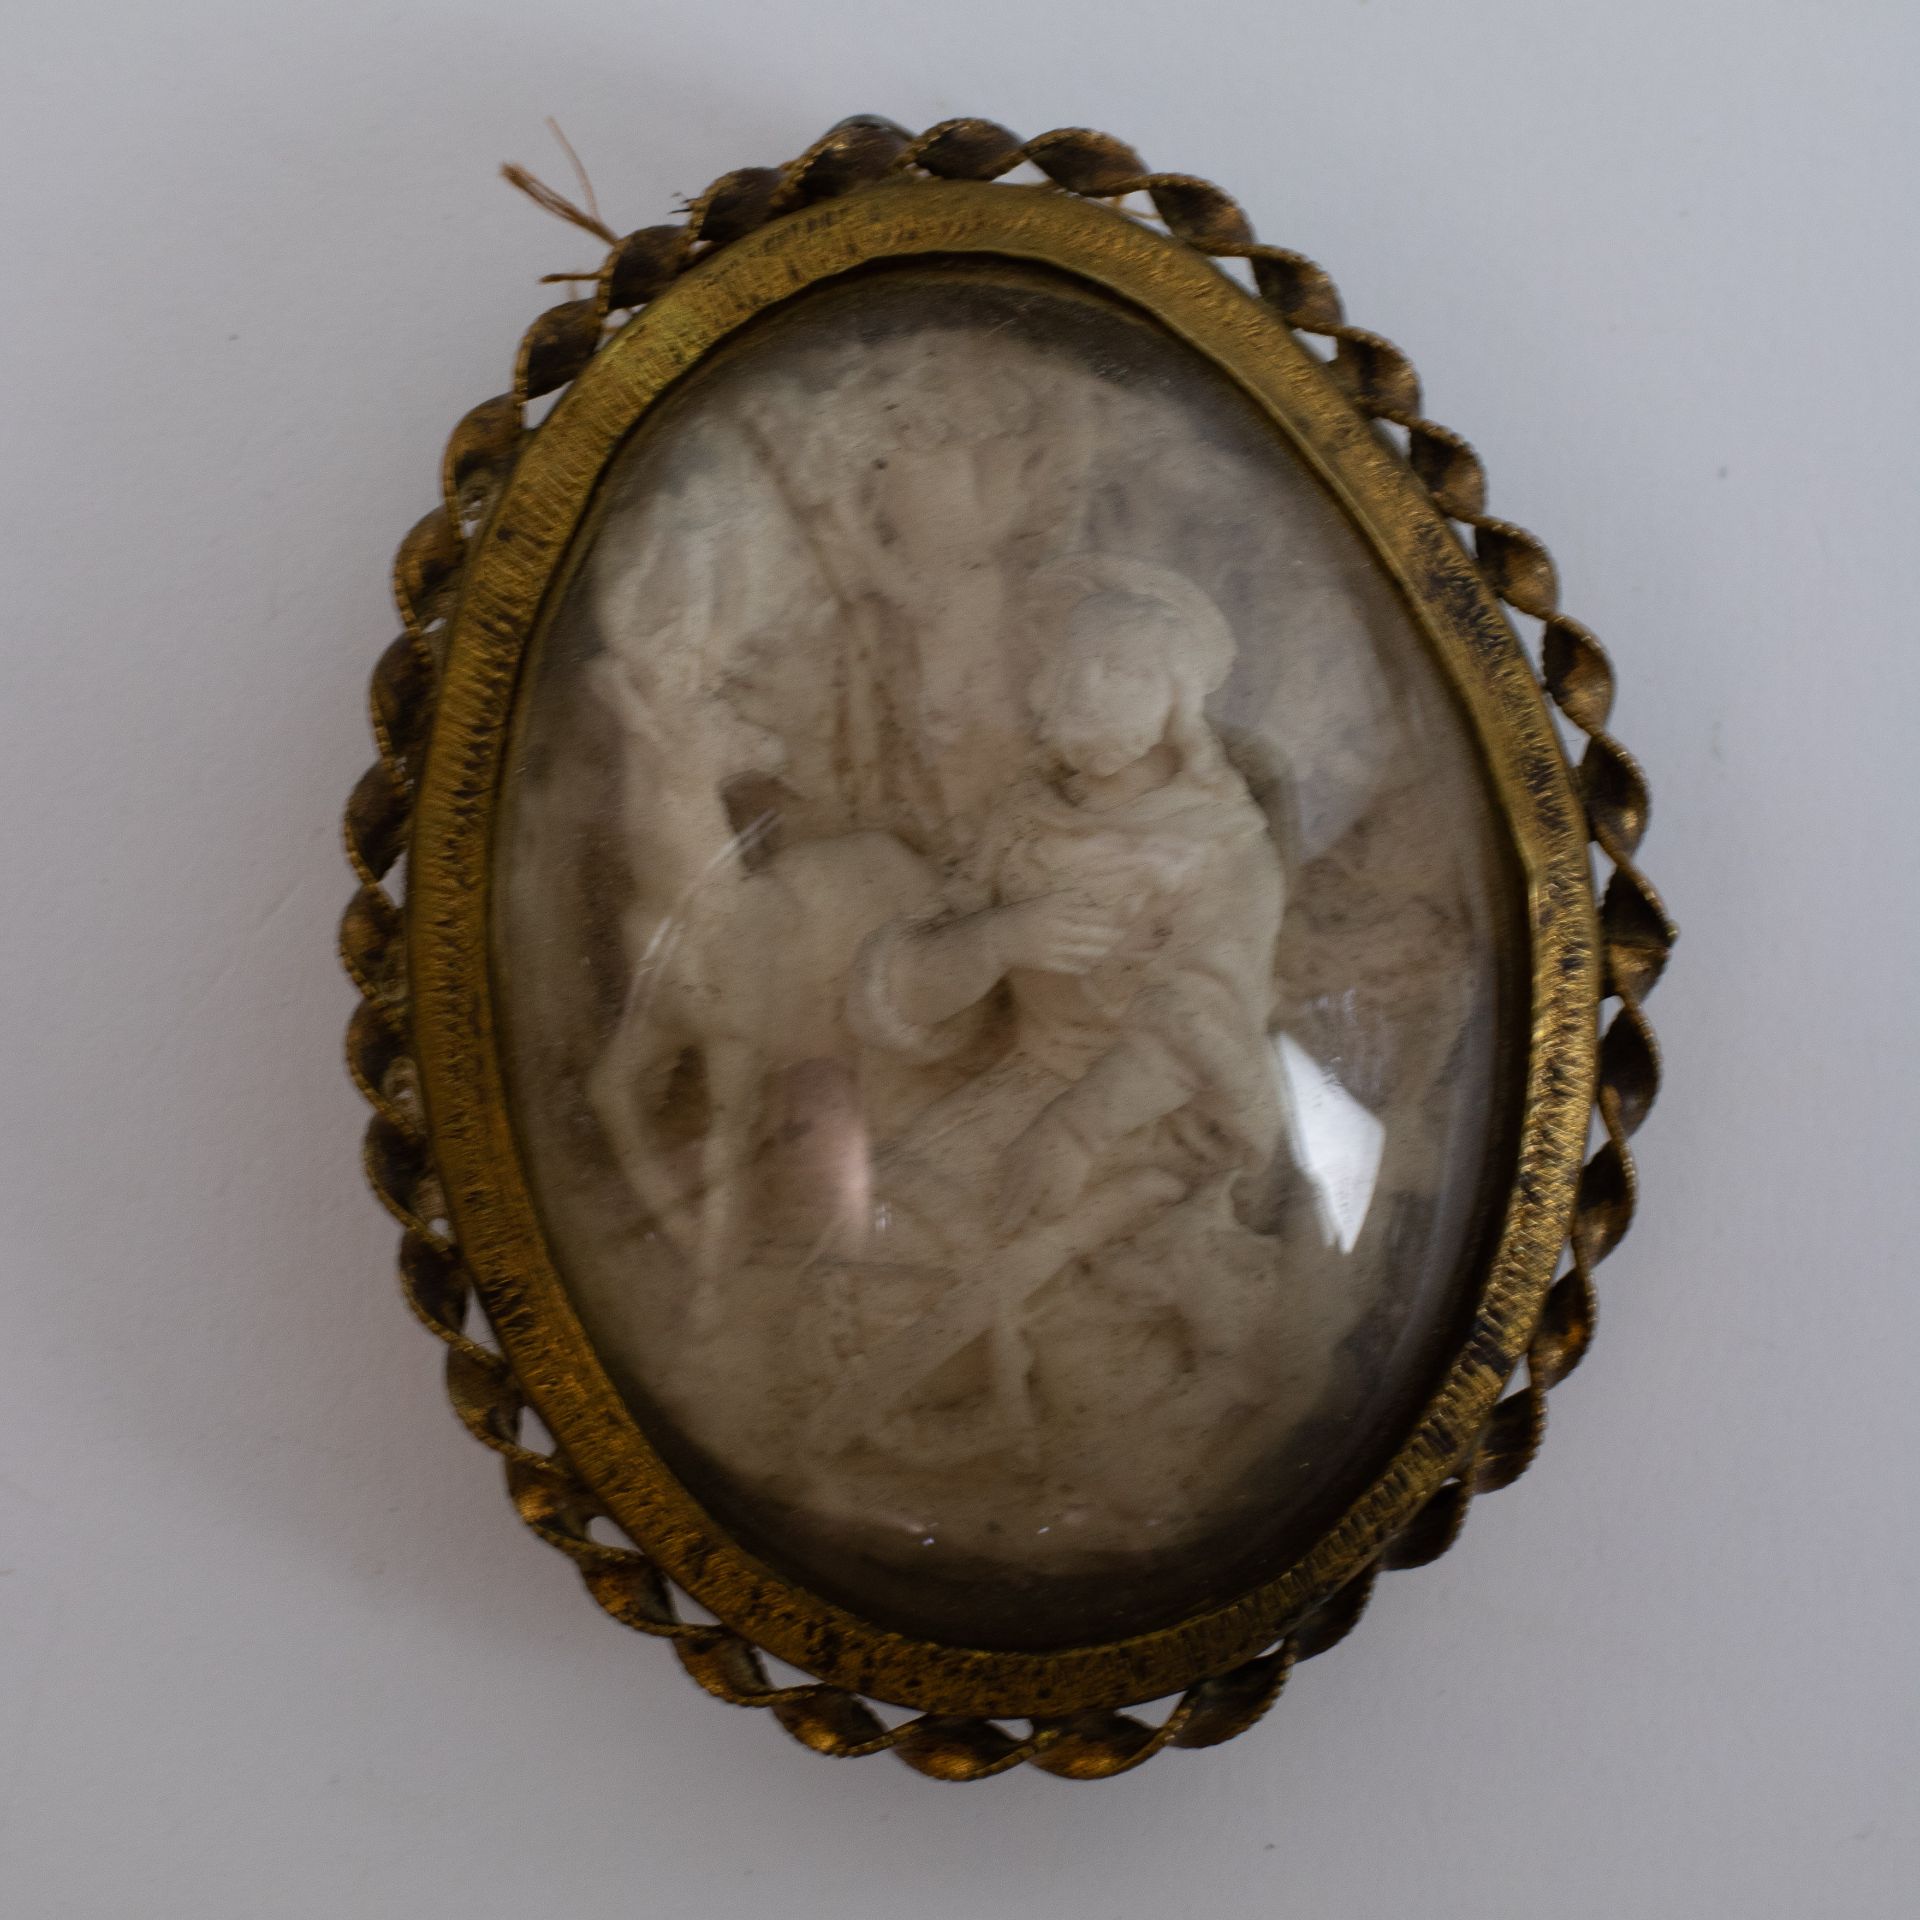 A collection of religious items consisting of a relic, a relic beguine Theressia Verhaeghe, a bottle - Image 4 of 8